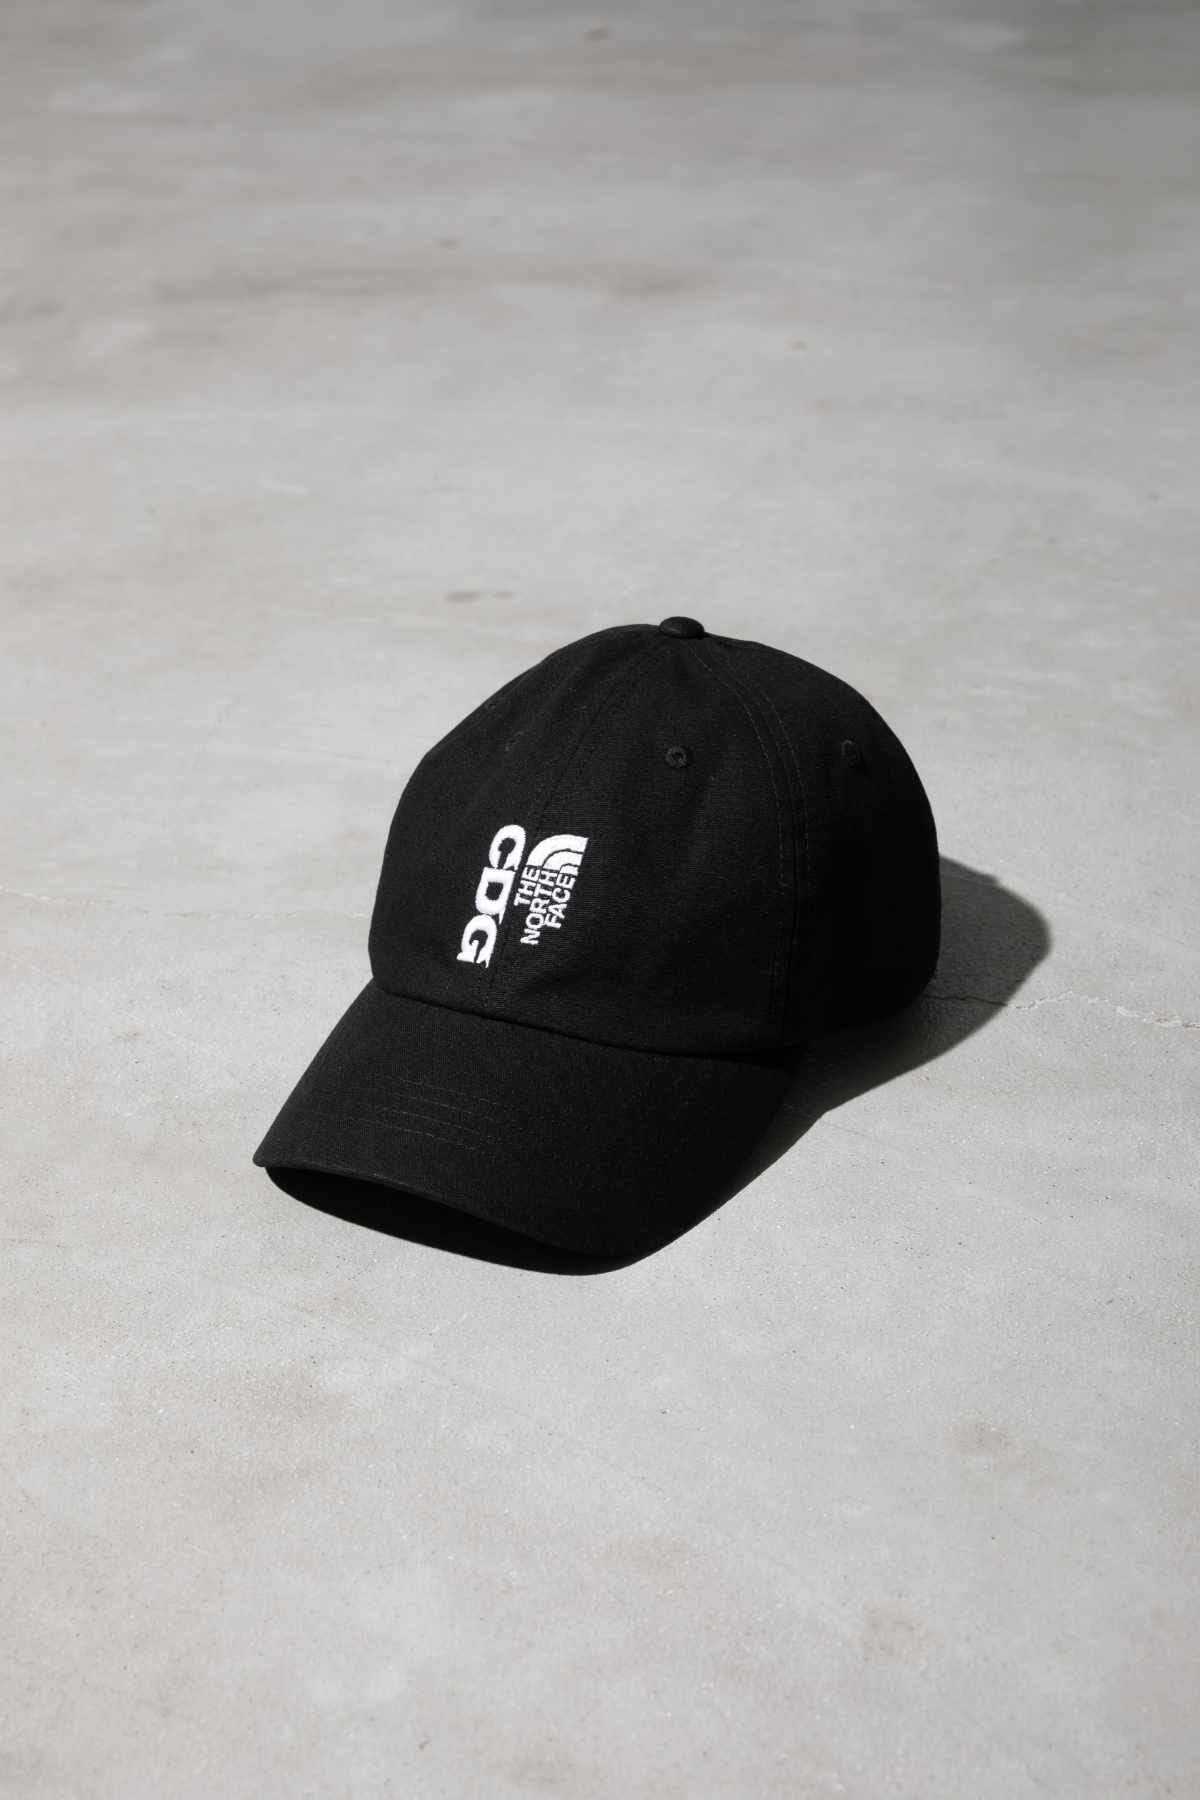 The CDG x TNF collab's black hat